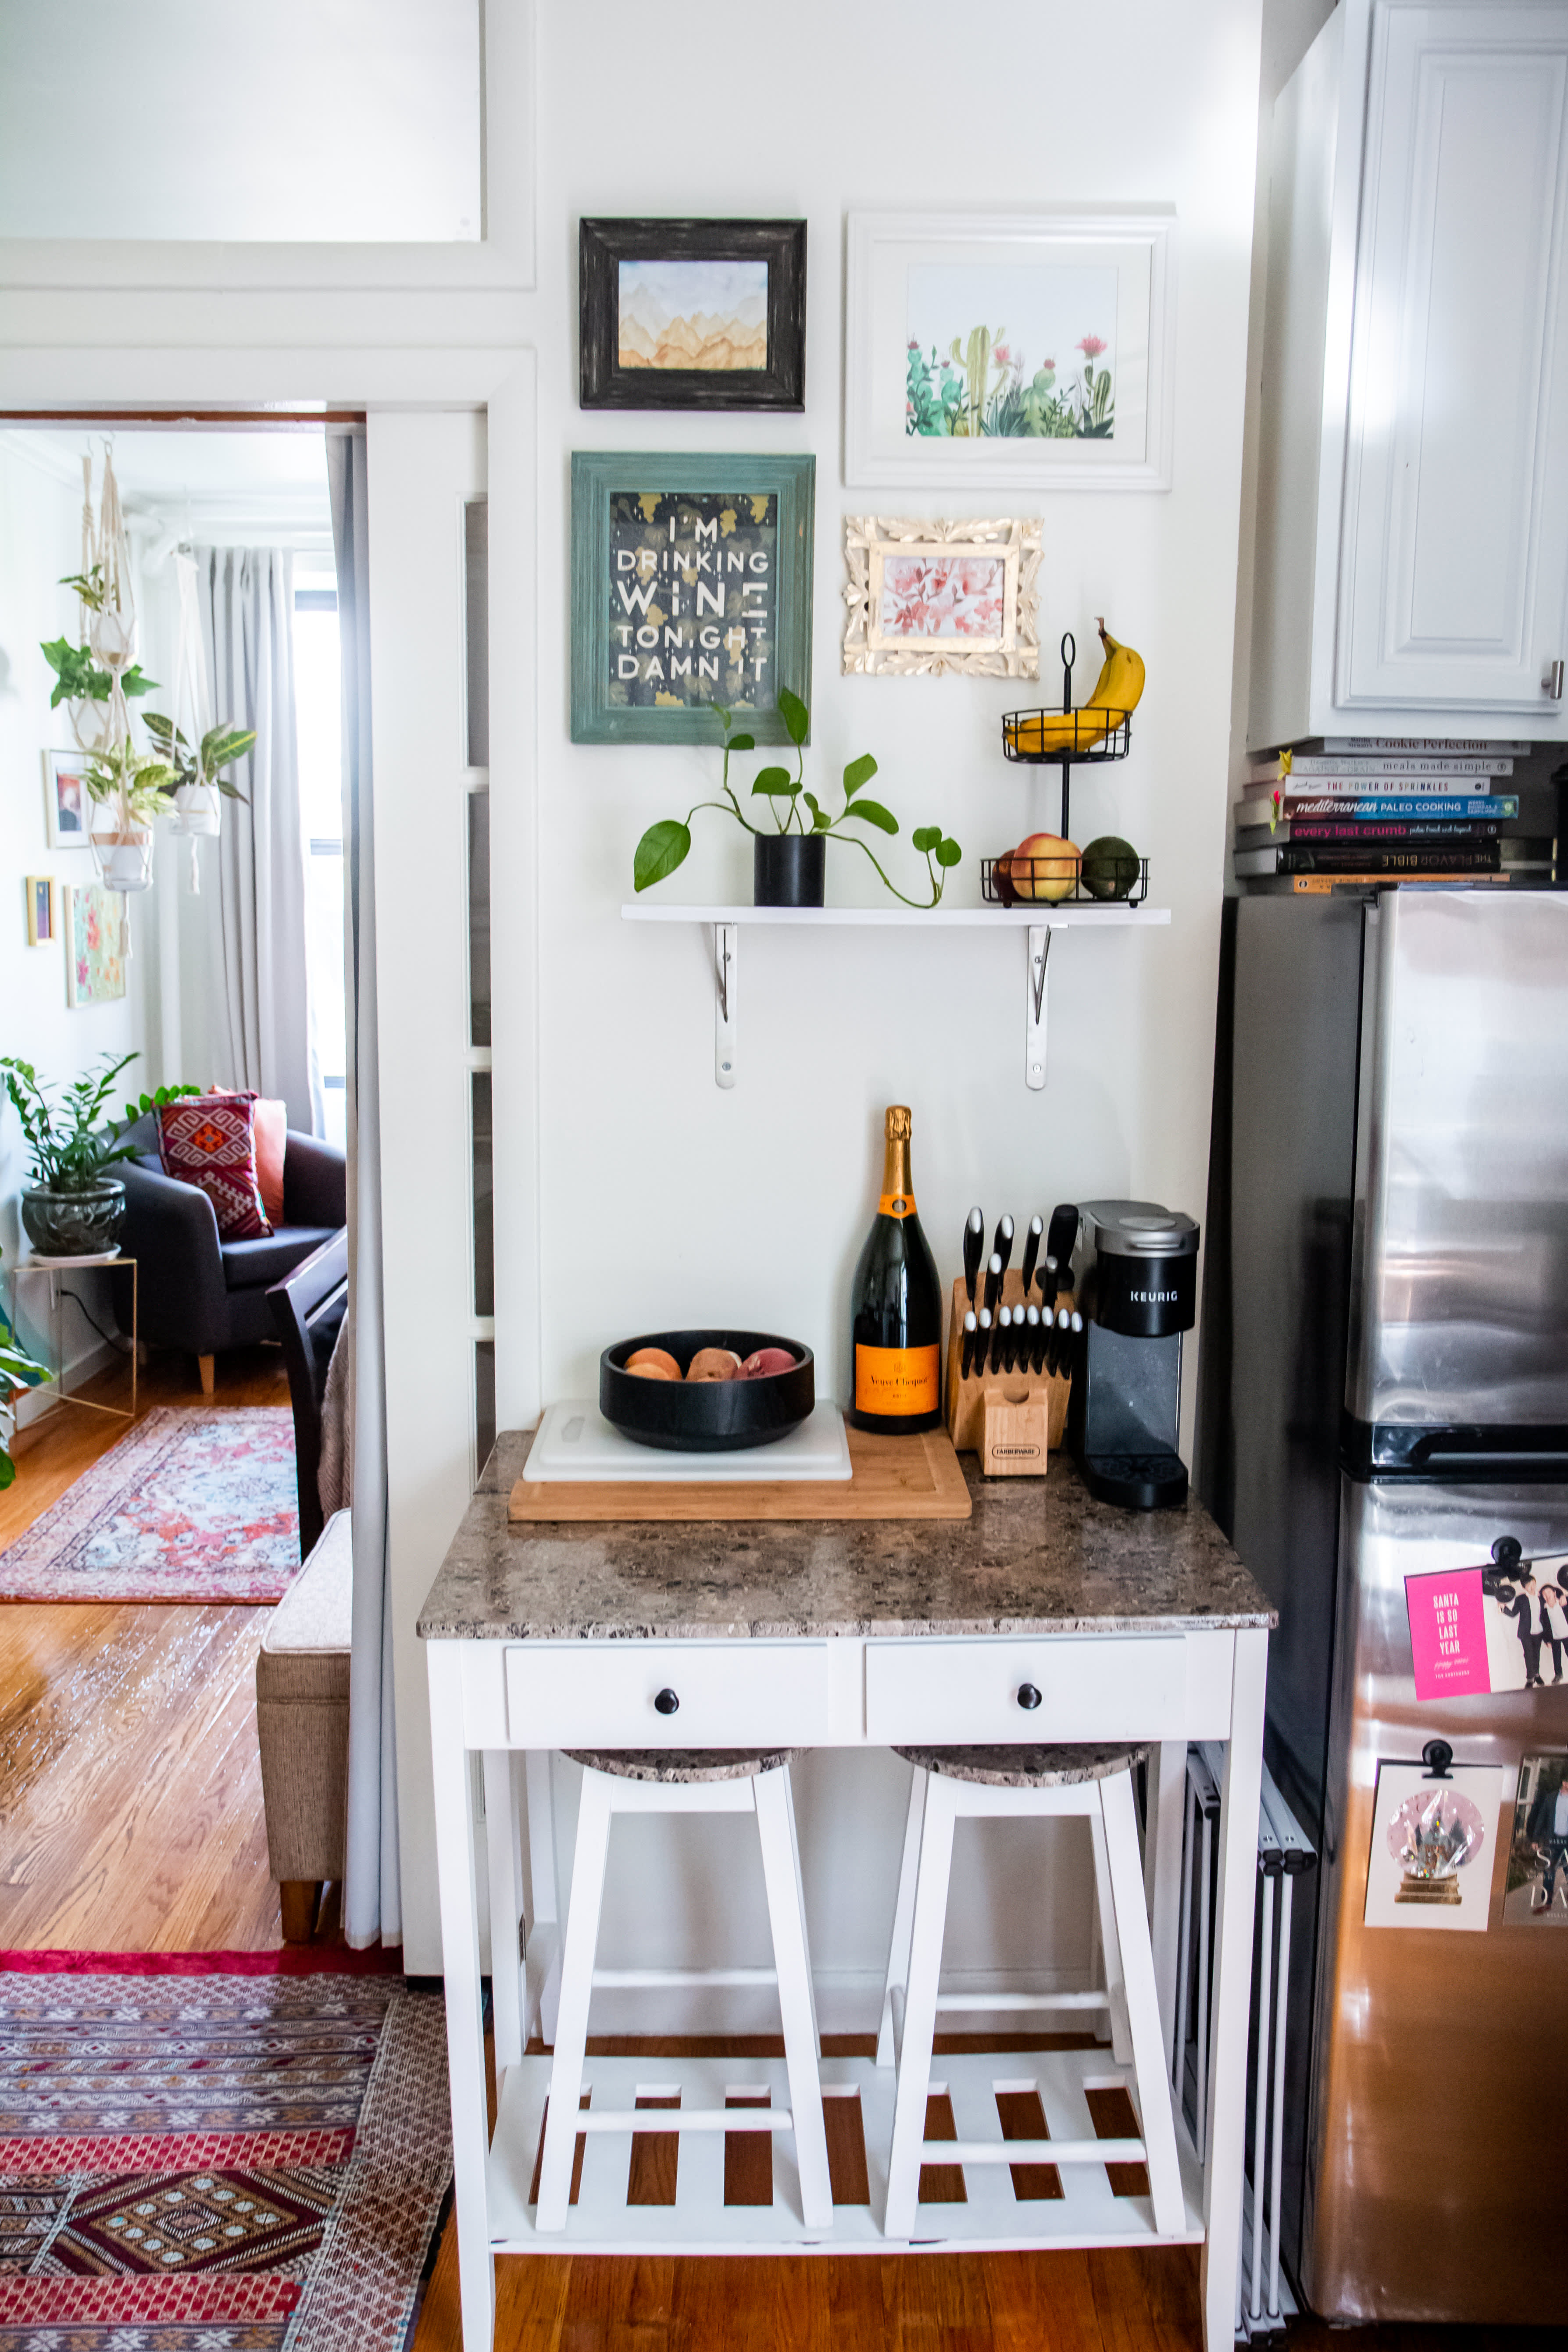 20 Storage Tips to Steal From a 20 Square Foot NYC Apartment   Kitchn